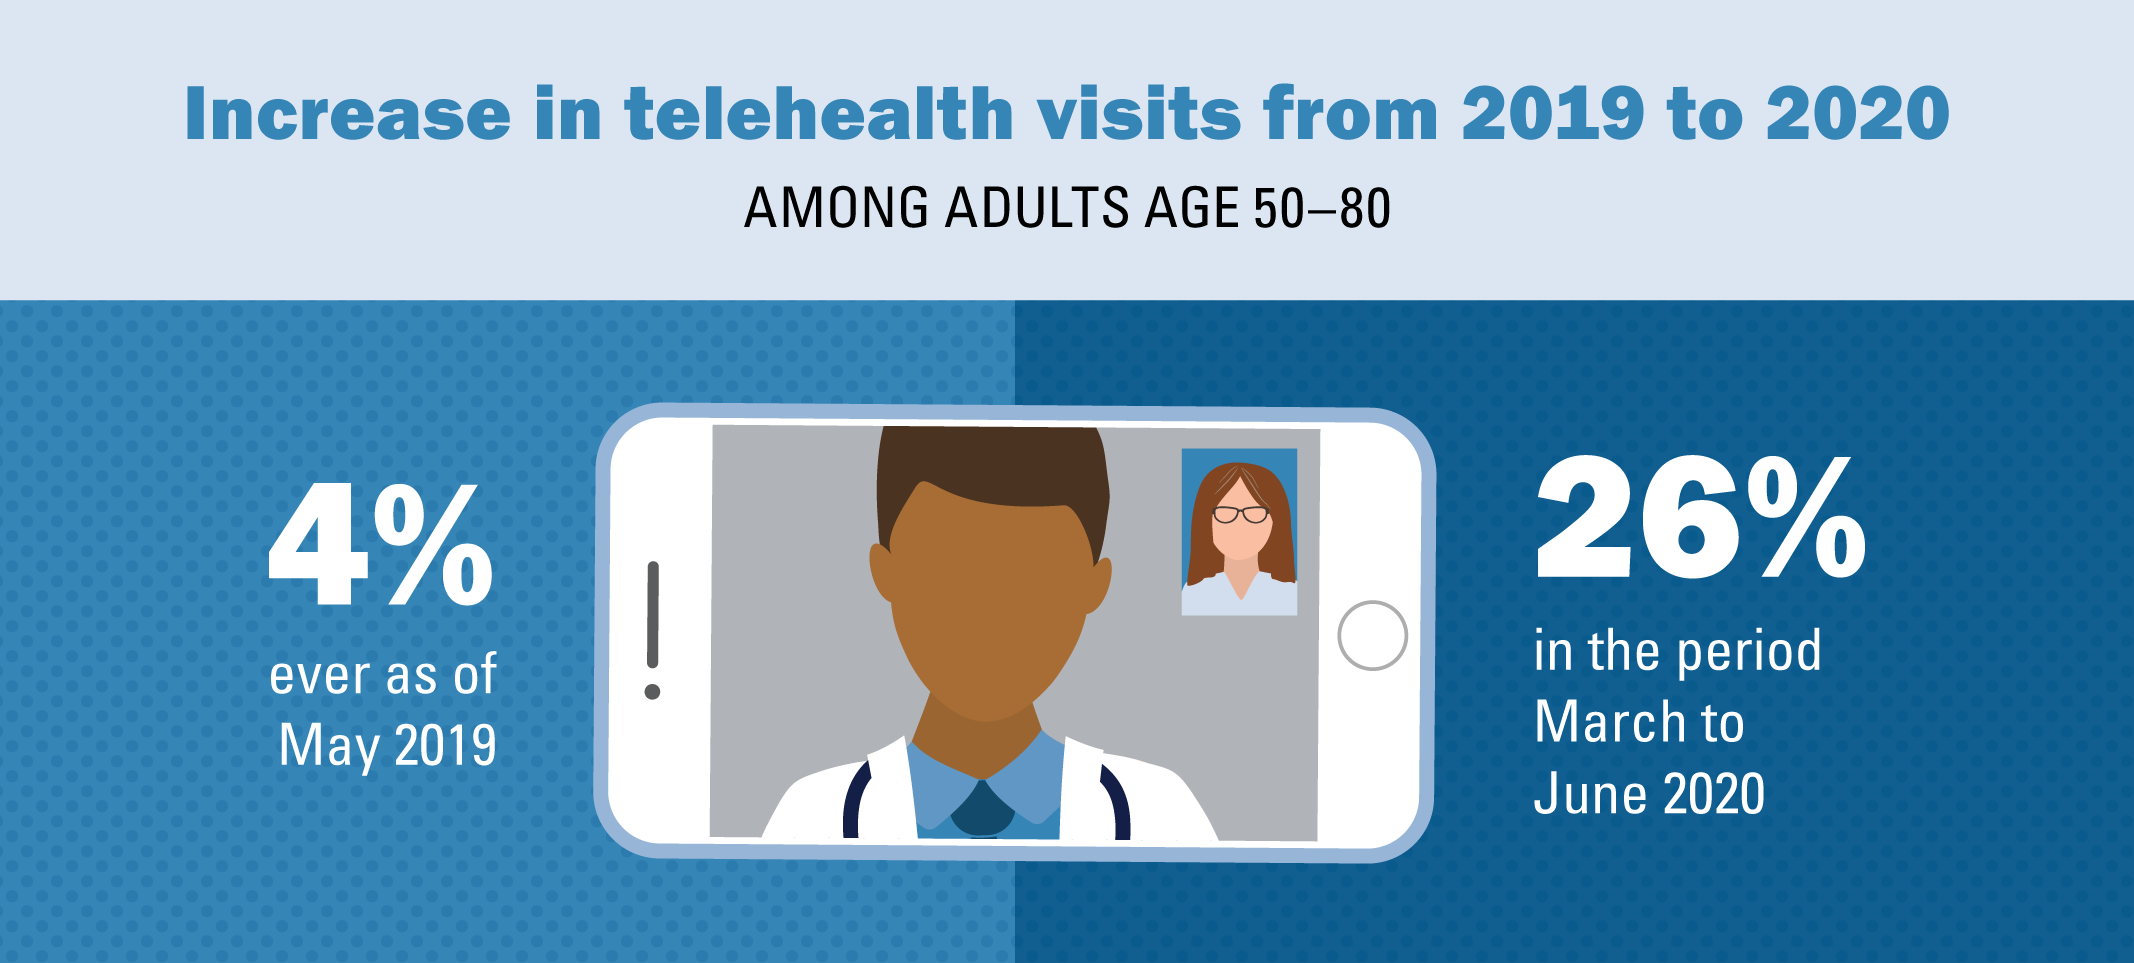 doctor on cell phone video; increase in telehealth visits from 2019 to 2020 among adults age 50-80 - 4% ever as of May 2019, 26% in the period of March to June 2020